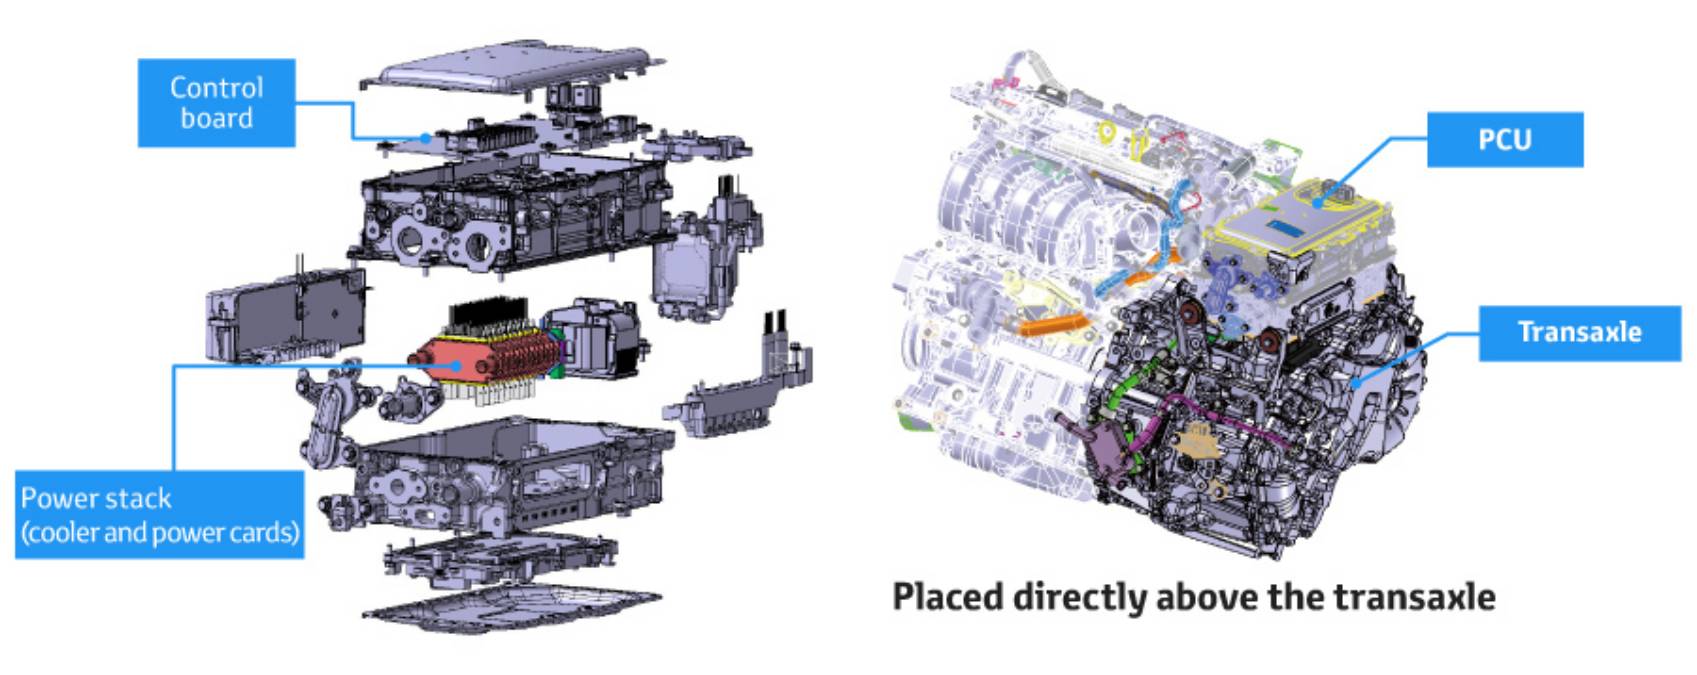 toyota hybrid system - Toyota Official Press Image